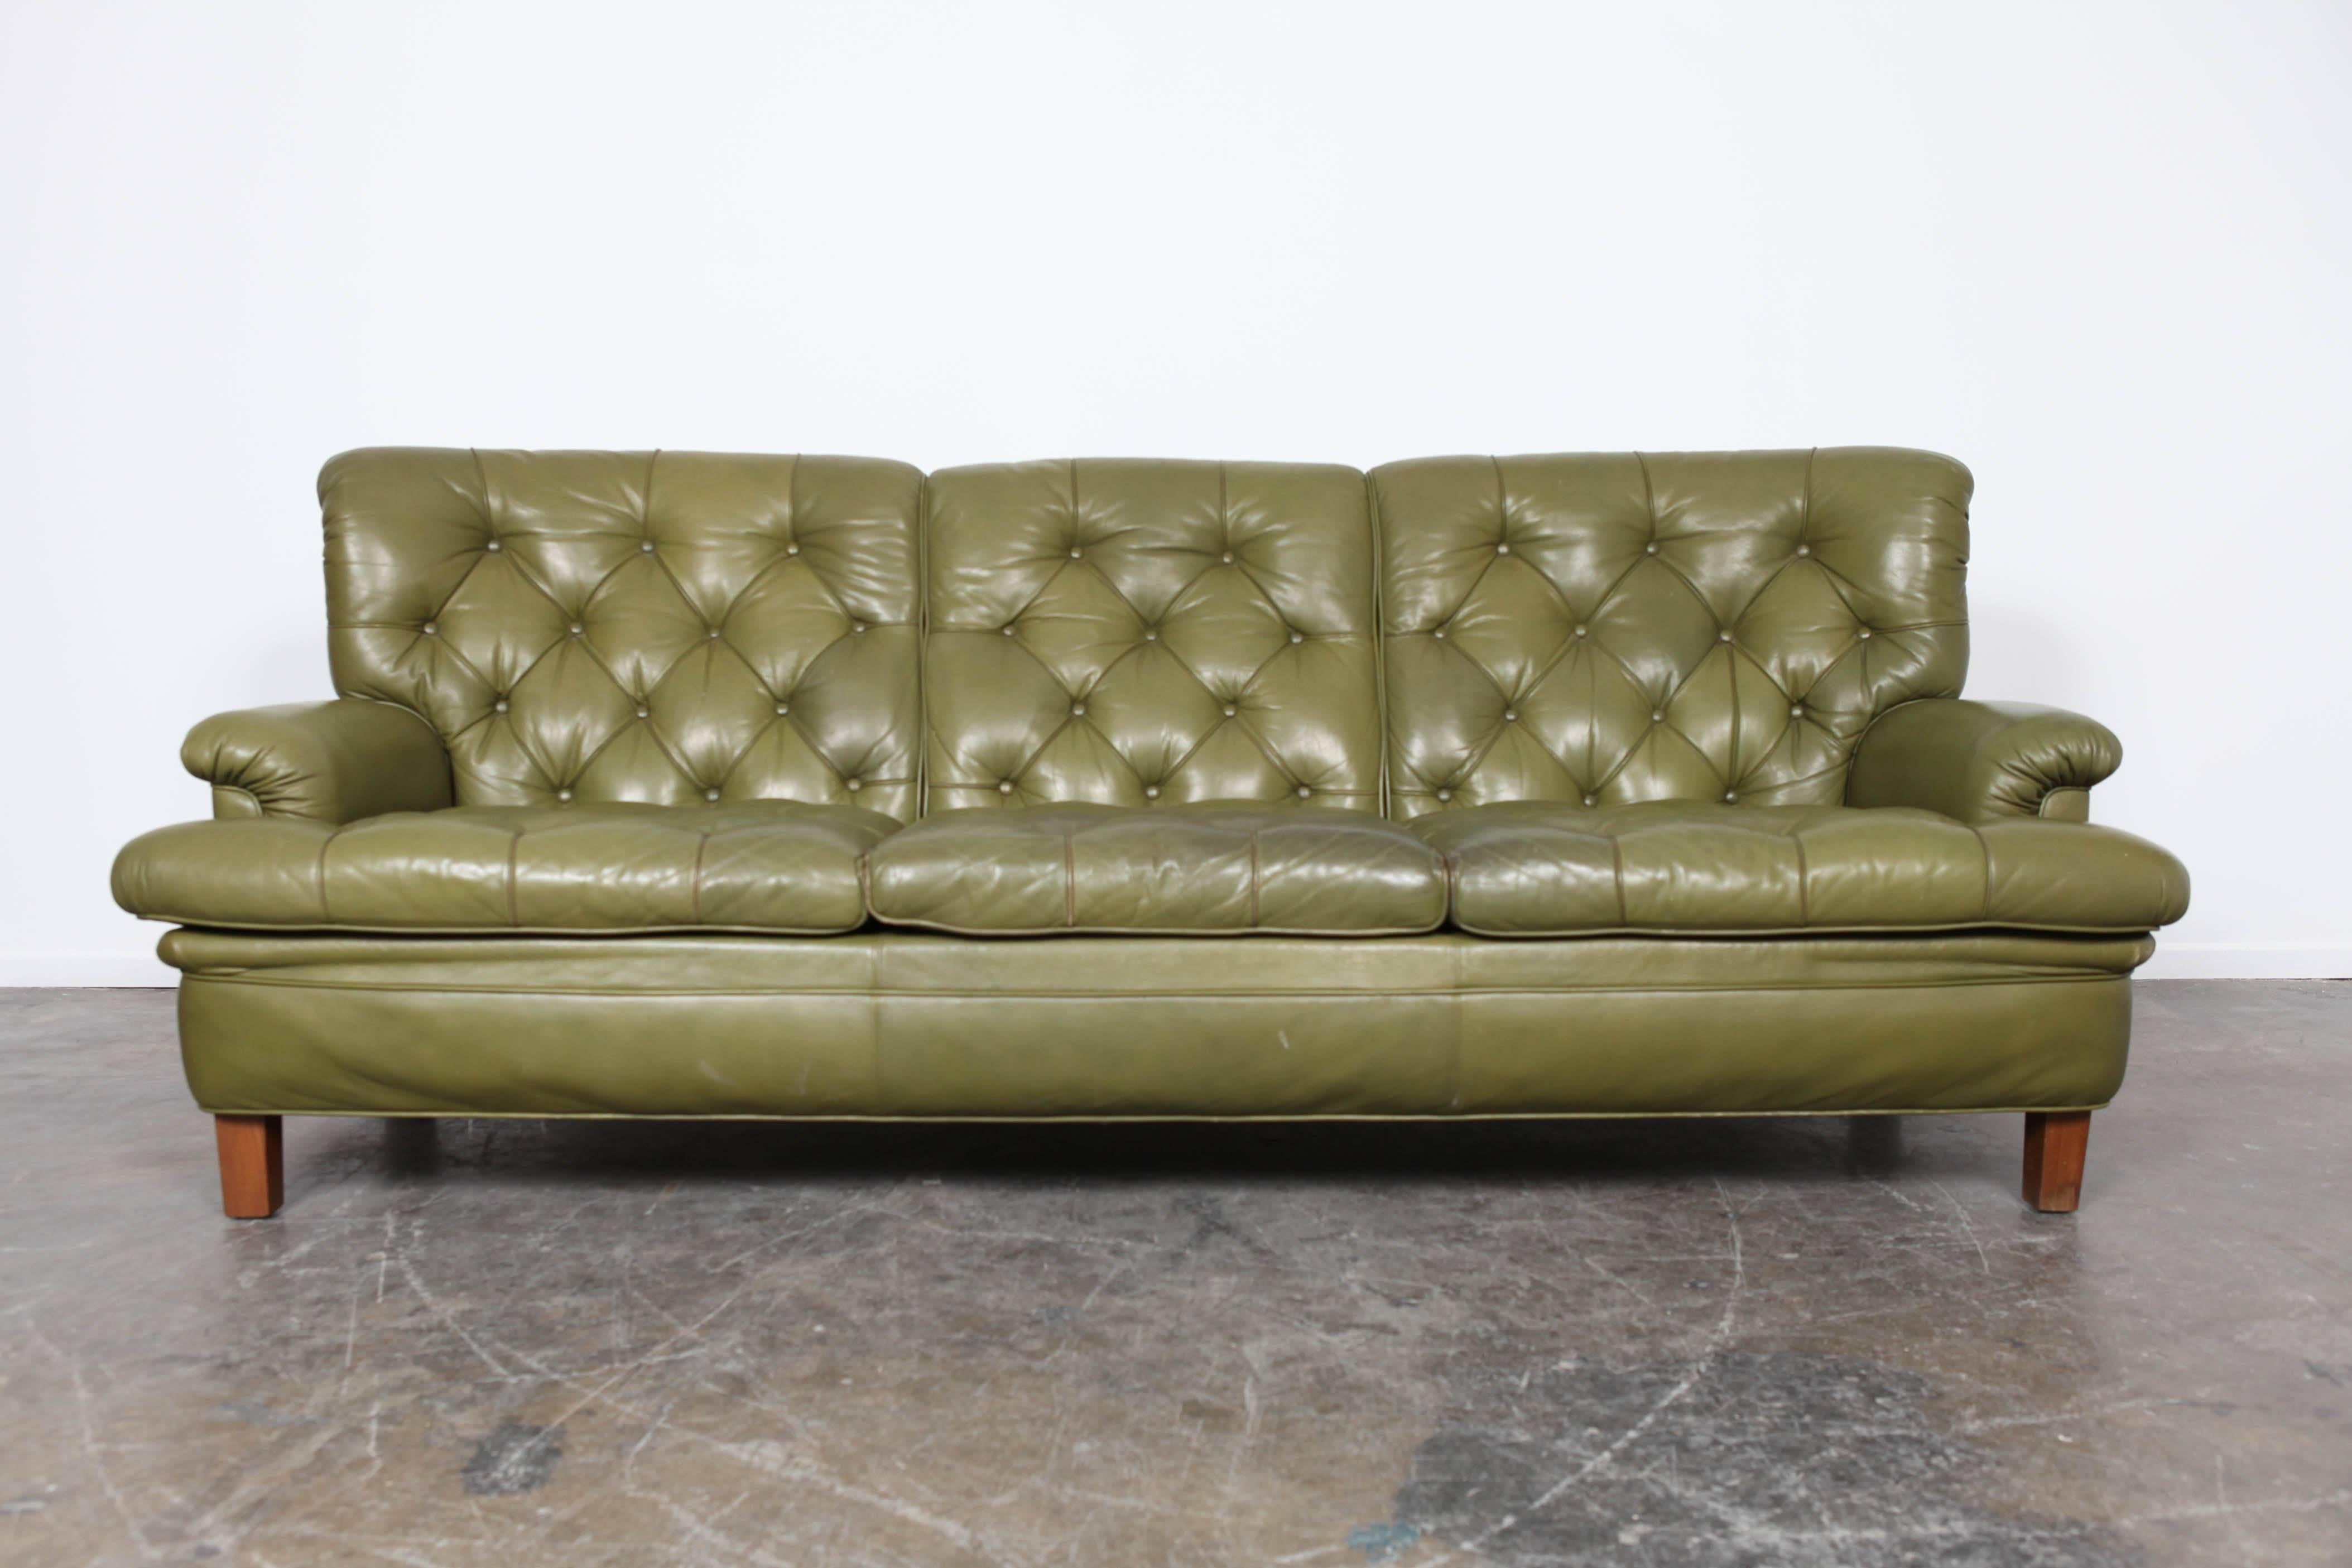 Tufted, three-seat sofa in original, oilve-green leather by Arne Norell.